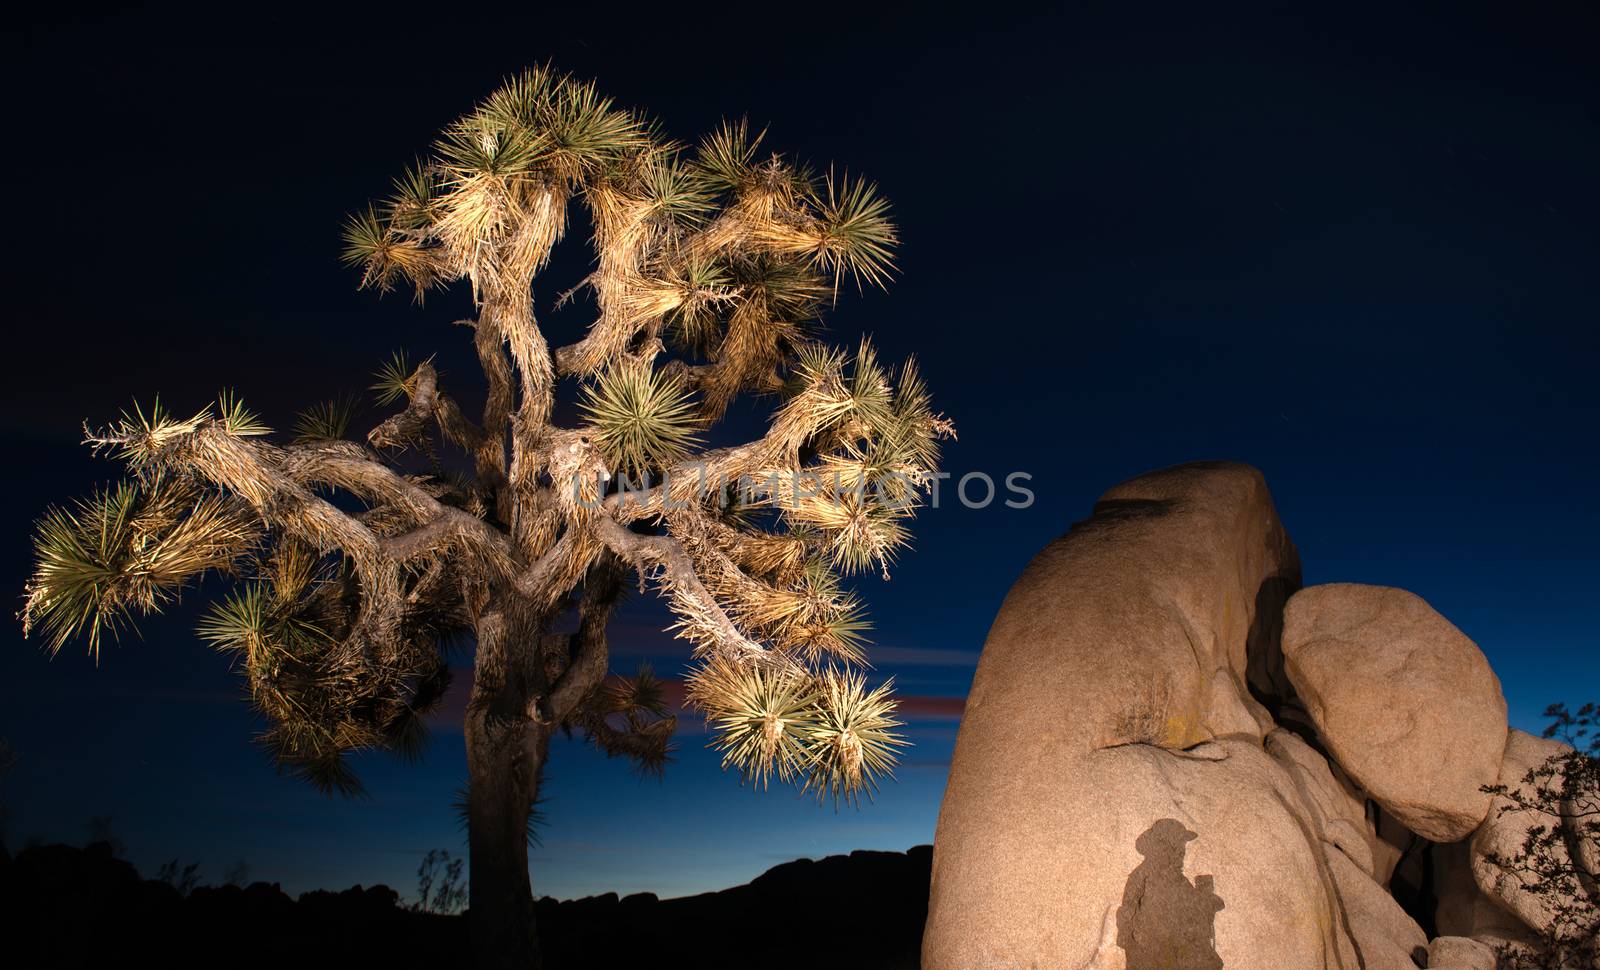 The shadow of the photographer lands on a huge rock near a Joshua Tree